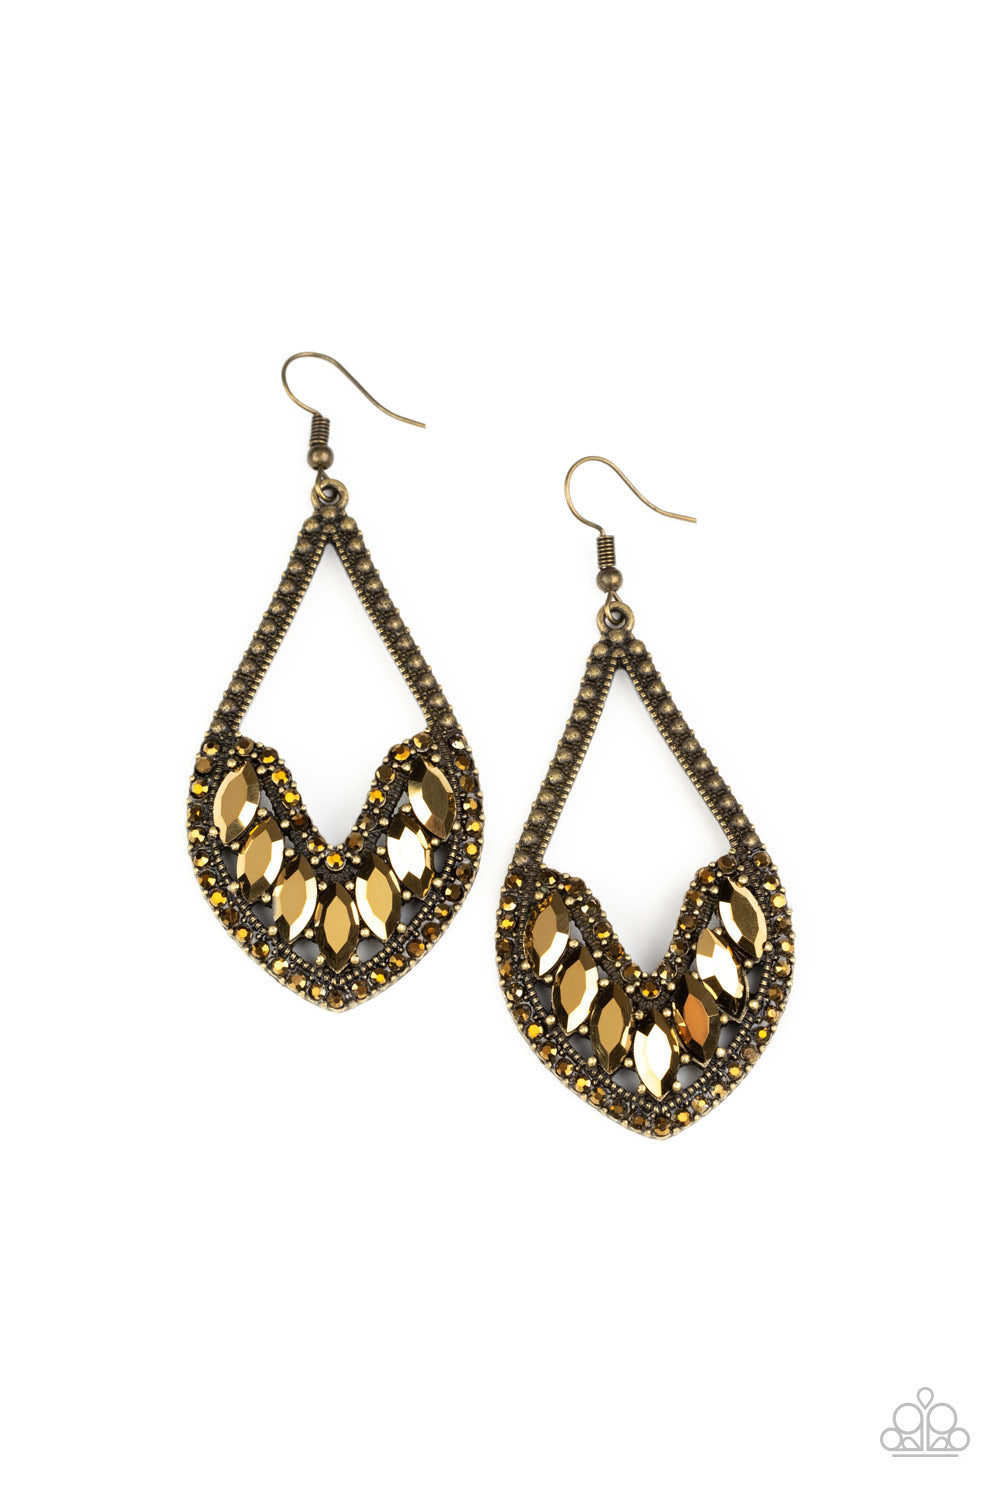 Ethereal Expressions - brass - Paparazzi earrings